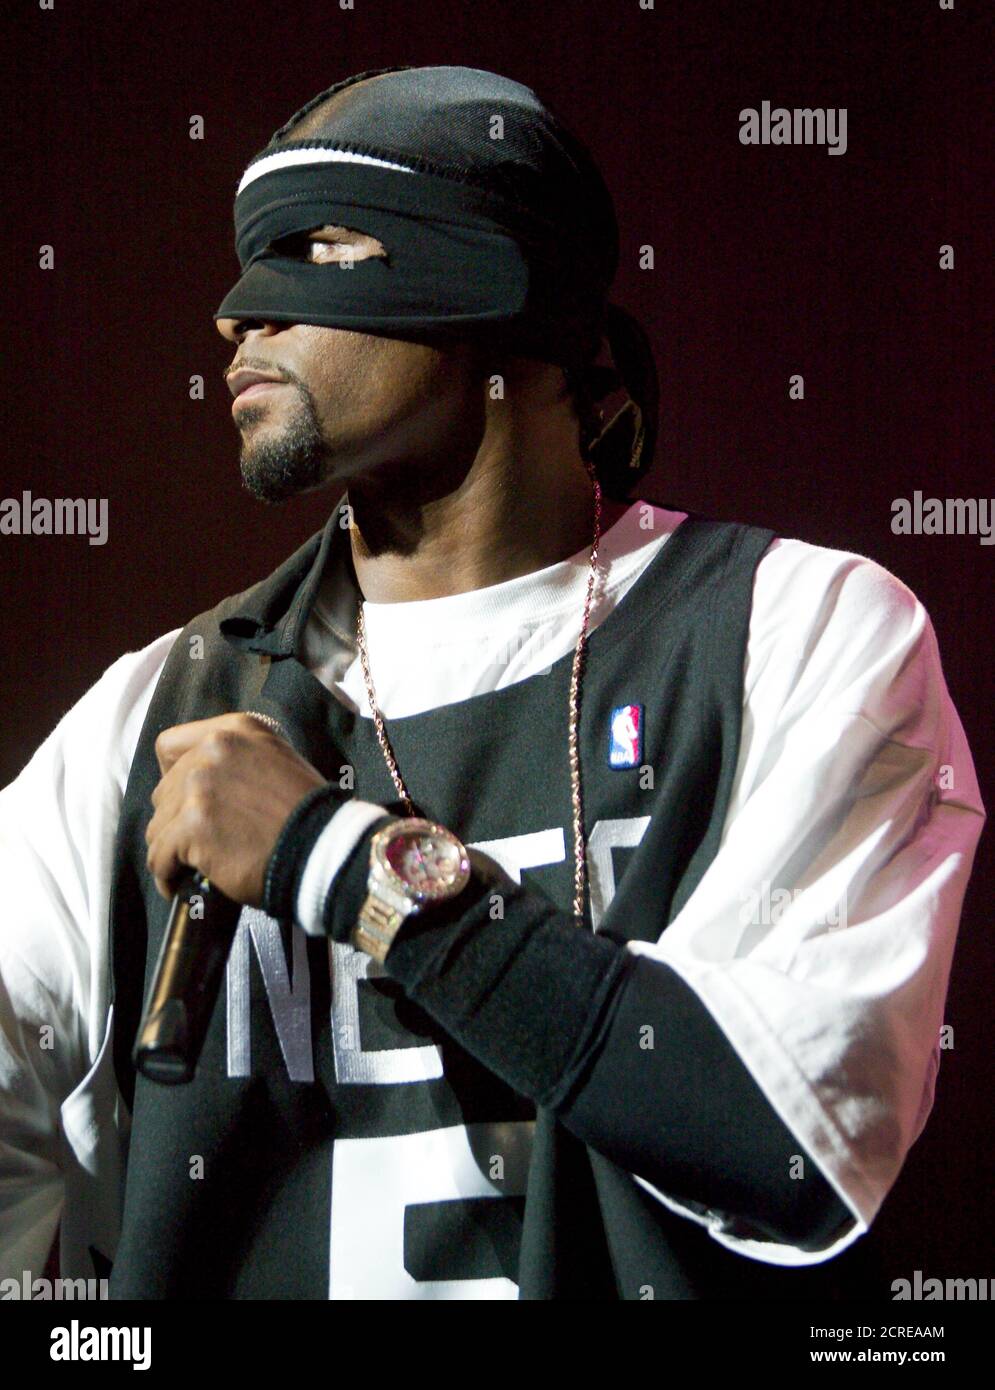 rbsoul-artist-r-kelly-performs-during-a-sold-out-show-at-the-aladdin-theatre-for-the-performing-arts-in-las-vegas-nevada-july-19-2003-the-singersongwriter-will-release-his-first-hits-compilation-the-r-in-rb-collection-volume-1-on-sept-9-on-jive-records-his-latest-album-chocolate-factory-has-been-certified-double-platinum-reutersethan-miller-em-2CREAAM.jpg